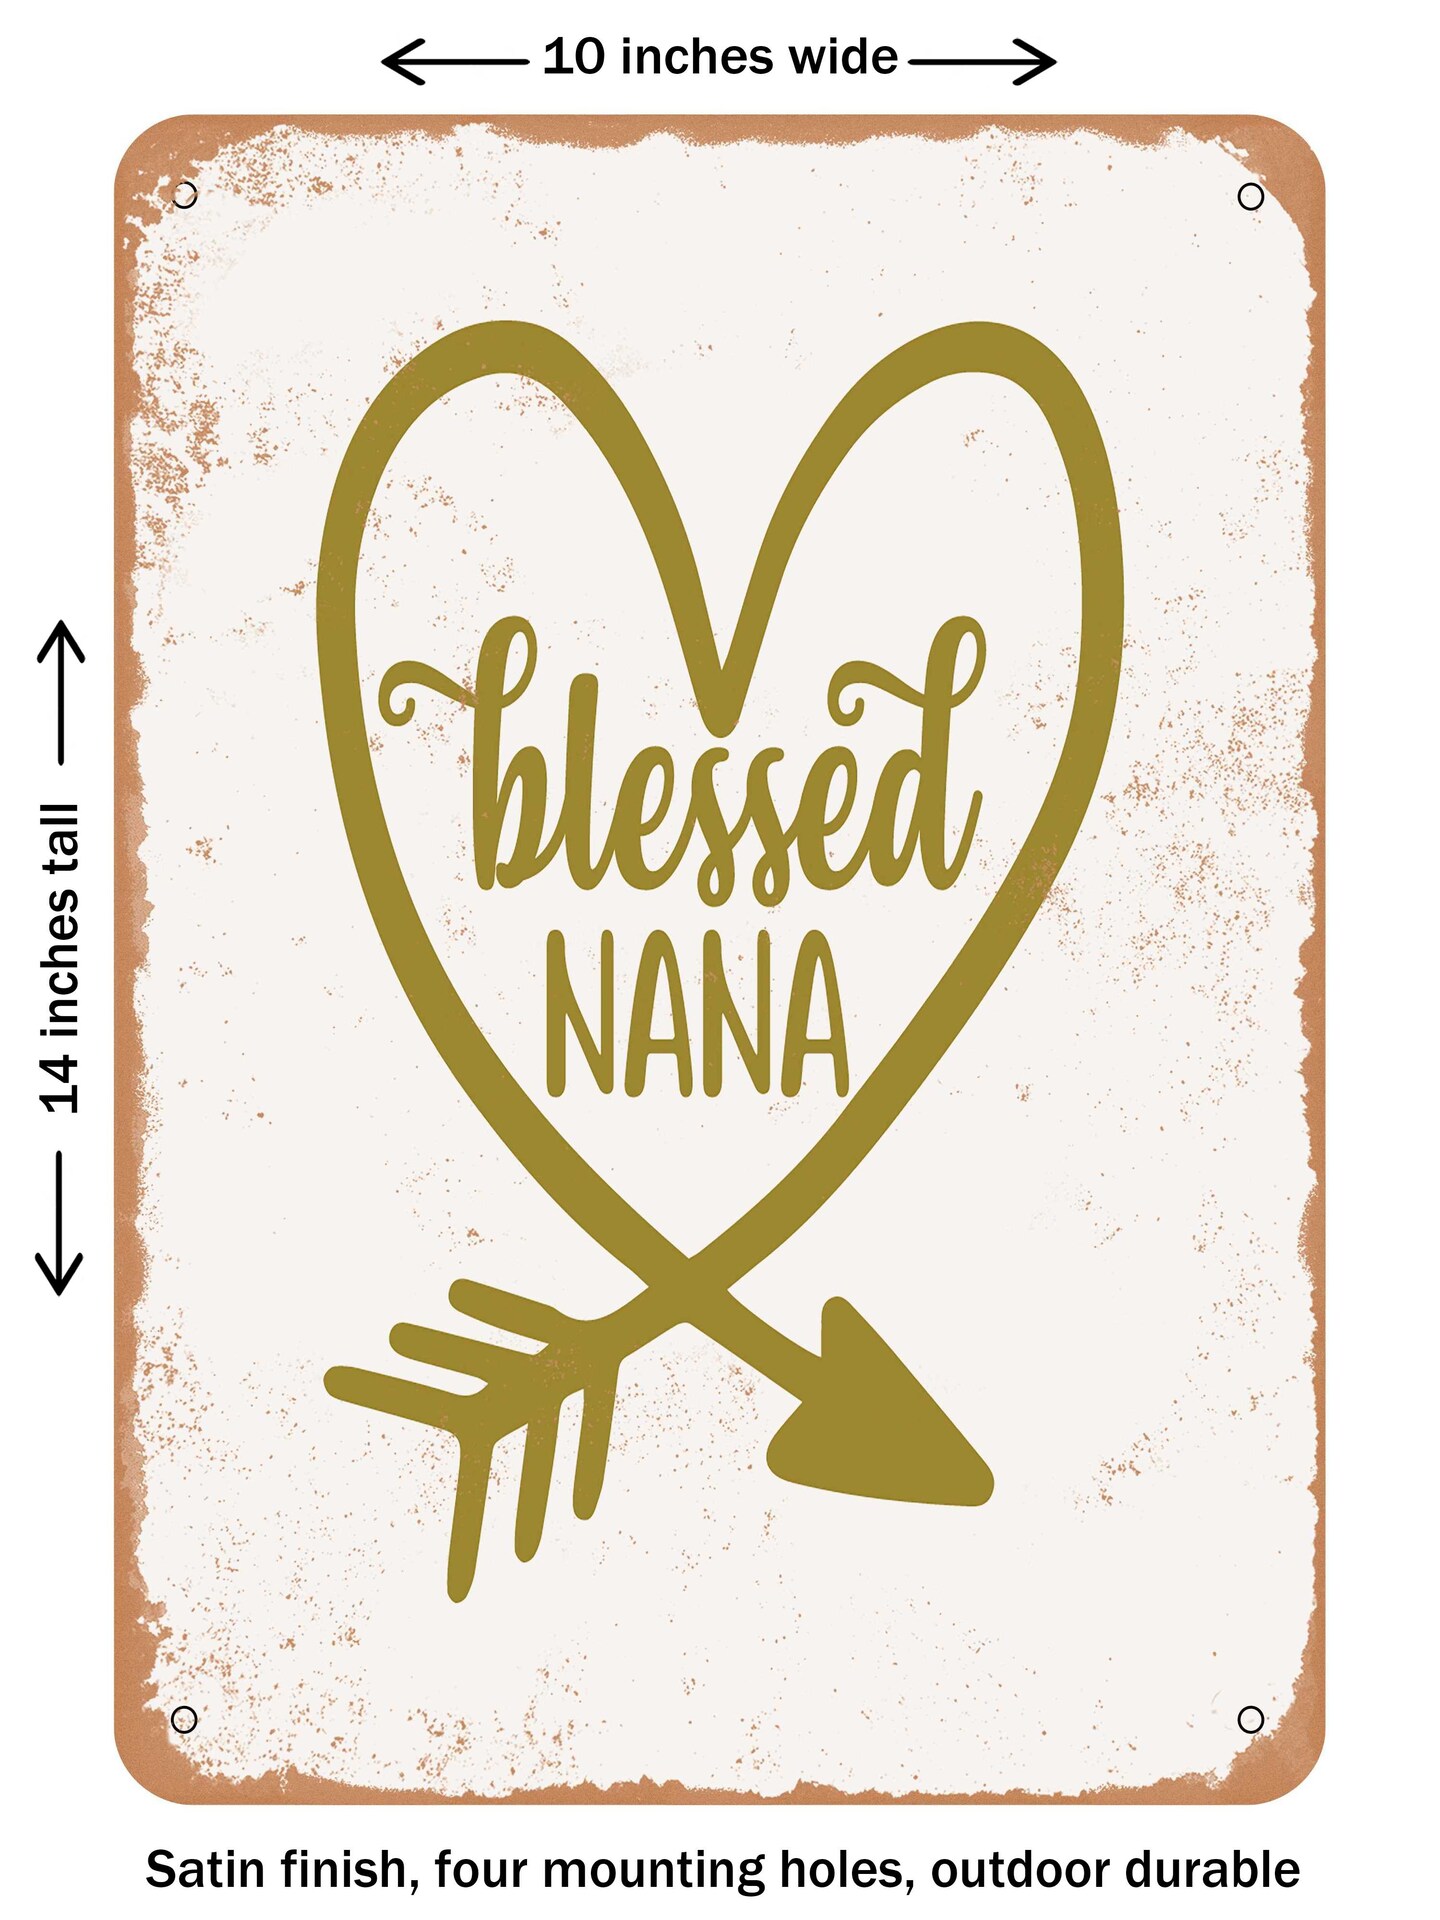 DECORATIVE METAL SIGN - Blessed Nana - 3  - Vintage Rusty Look